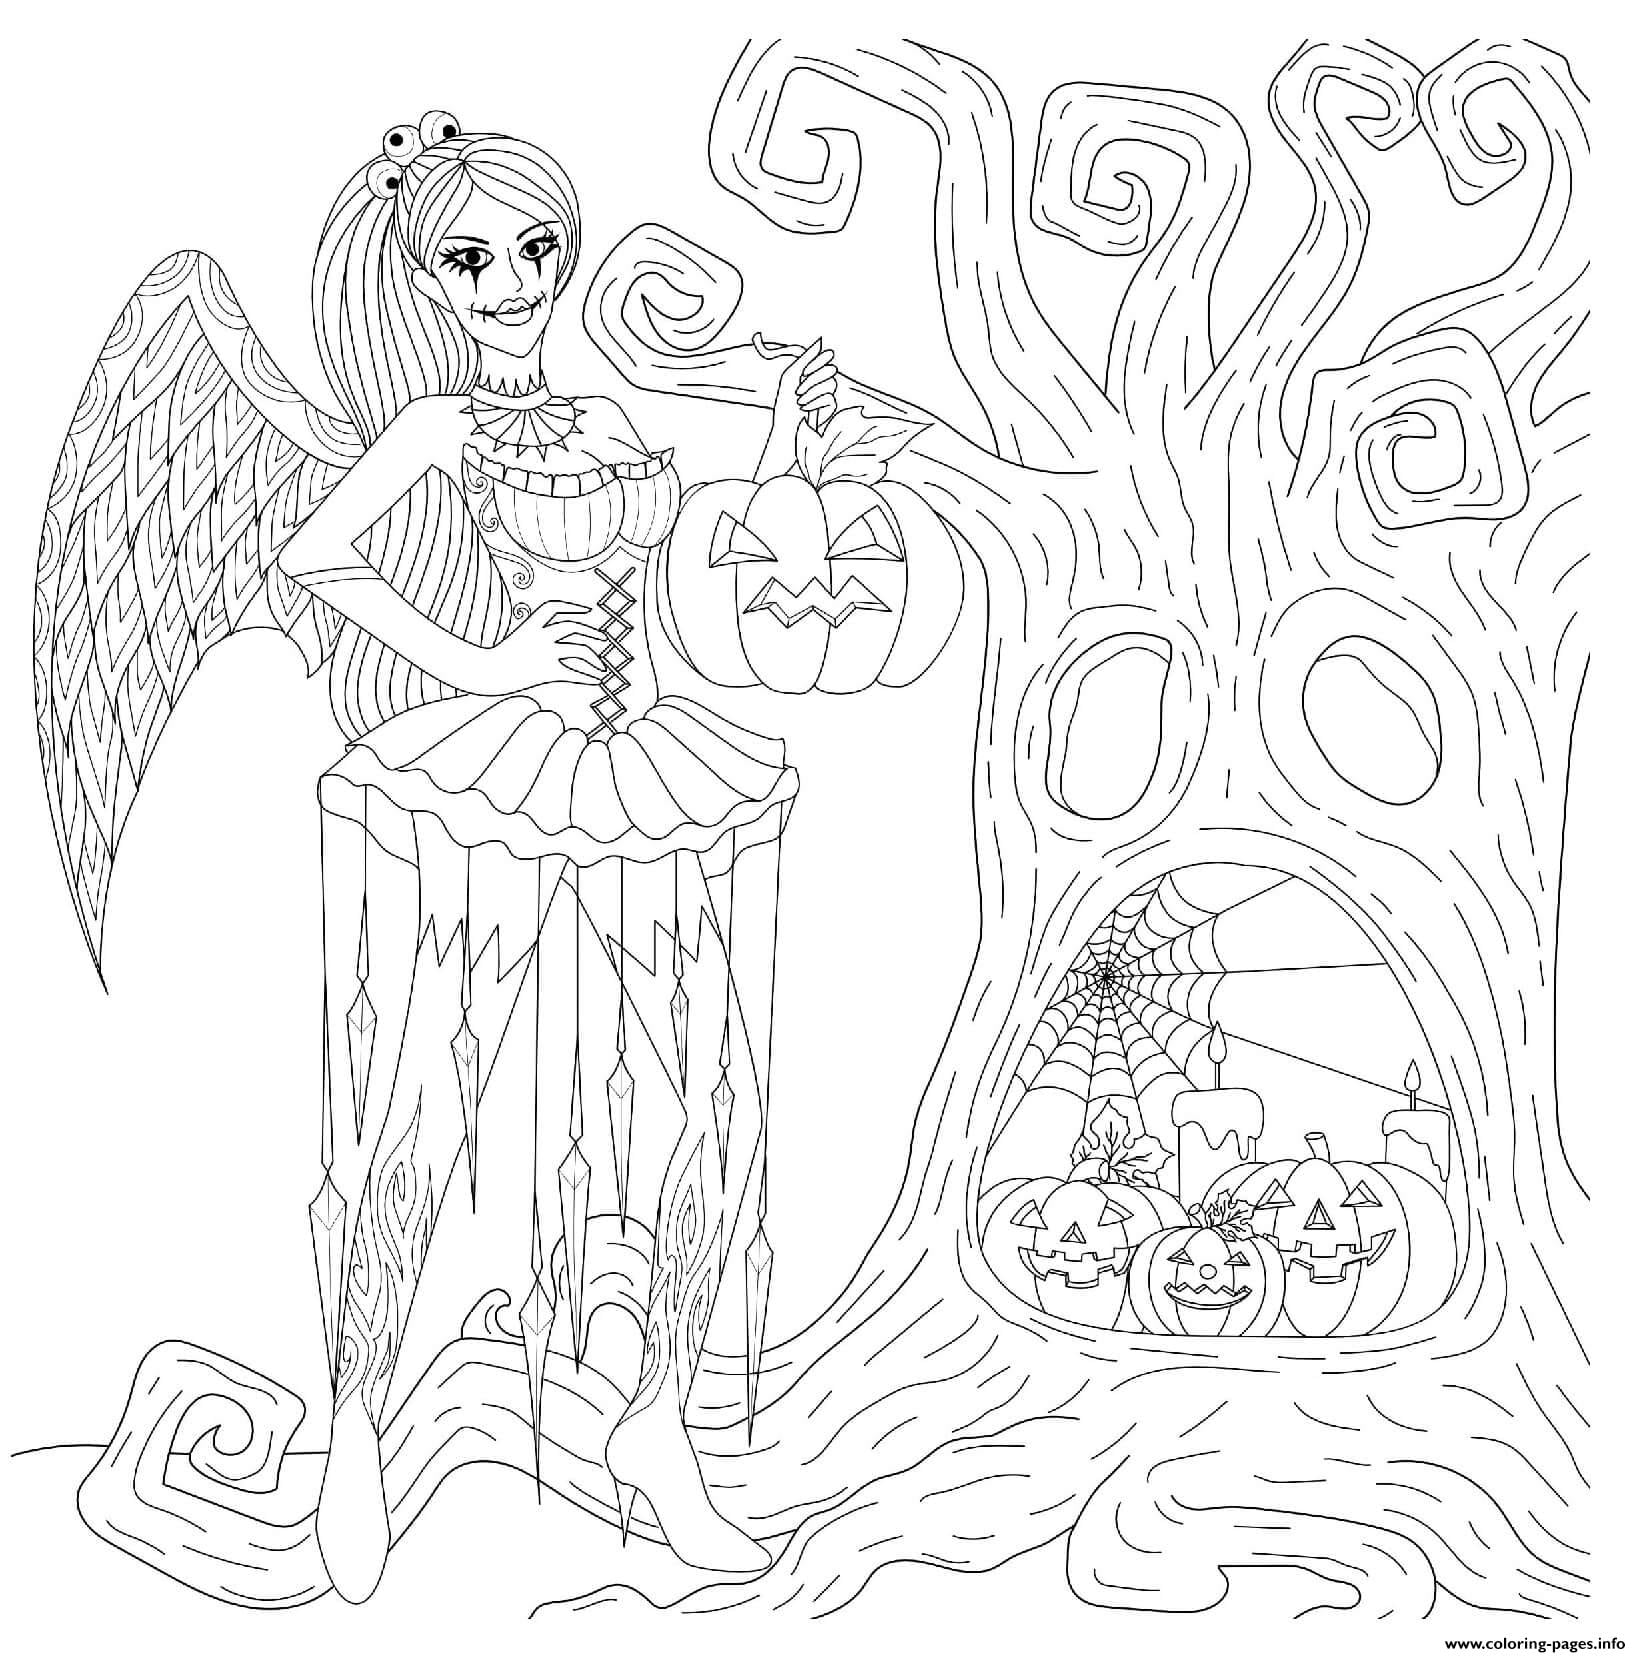 Printable Halloween Coloring Pages For Adults | POPSUGAR Smart Living